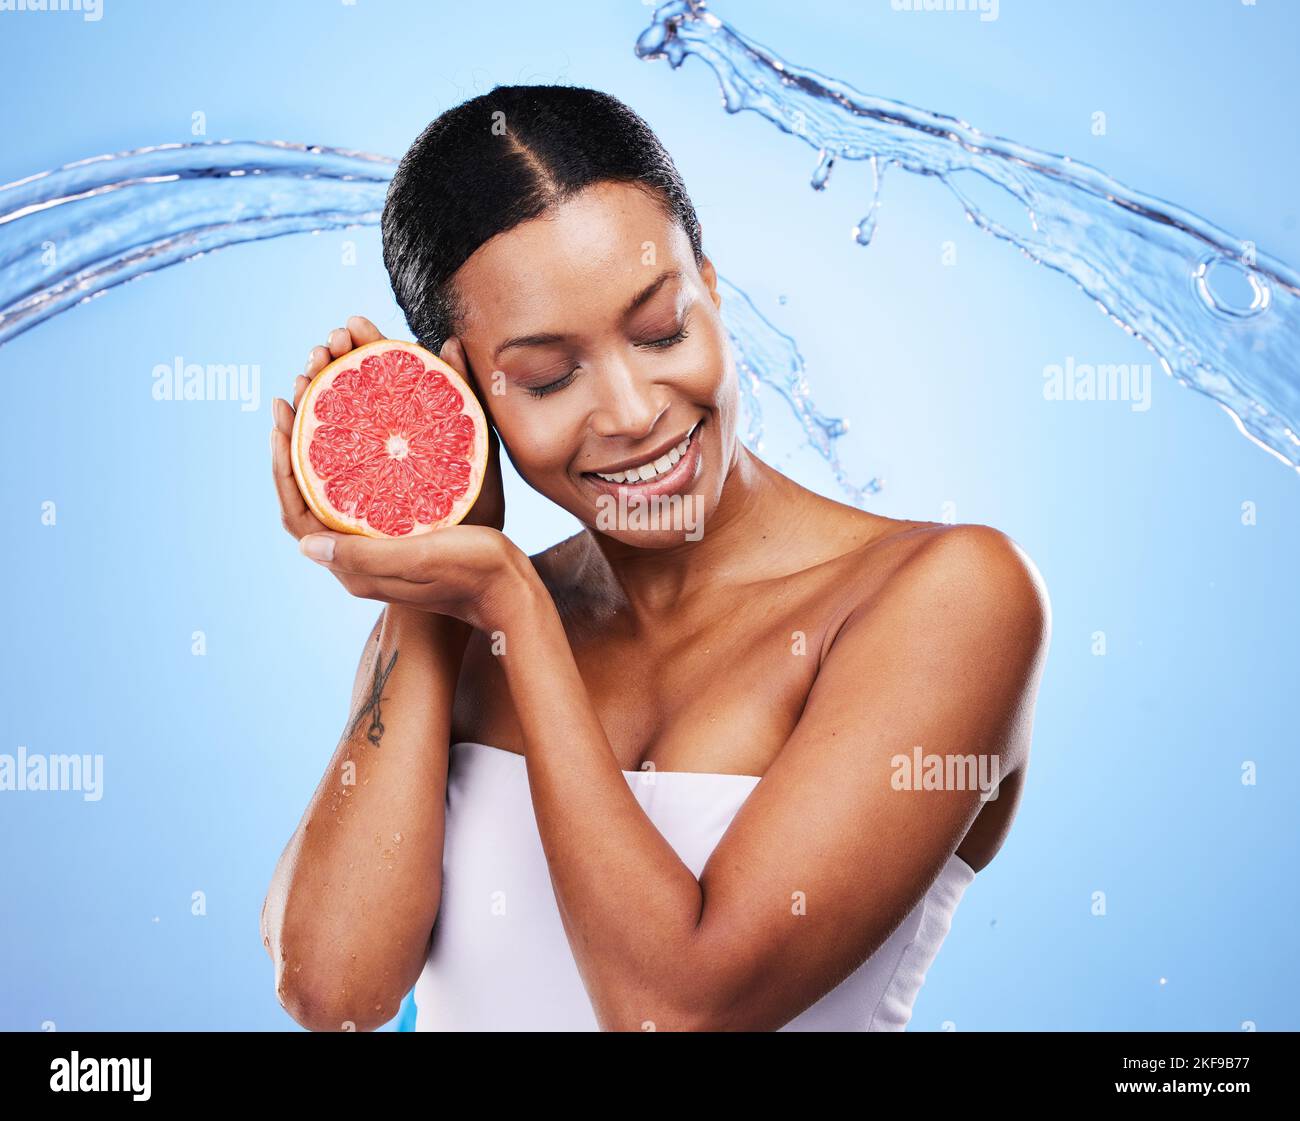 Water splash, grapefruit and skincare of a black woman holding fruit, diet food and nutrition. Vitamin c, cosmetic health and wellness of a model with Stock Photo